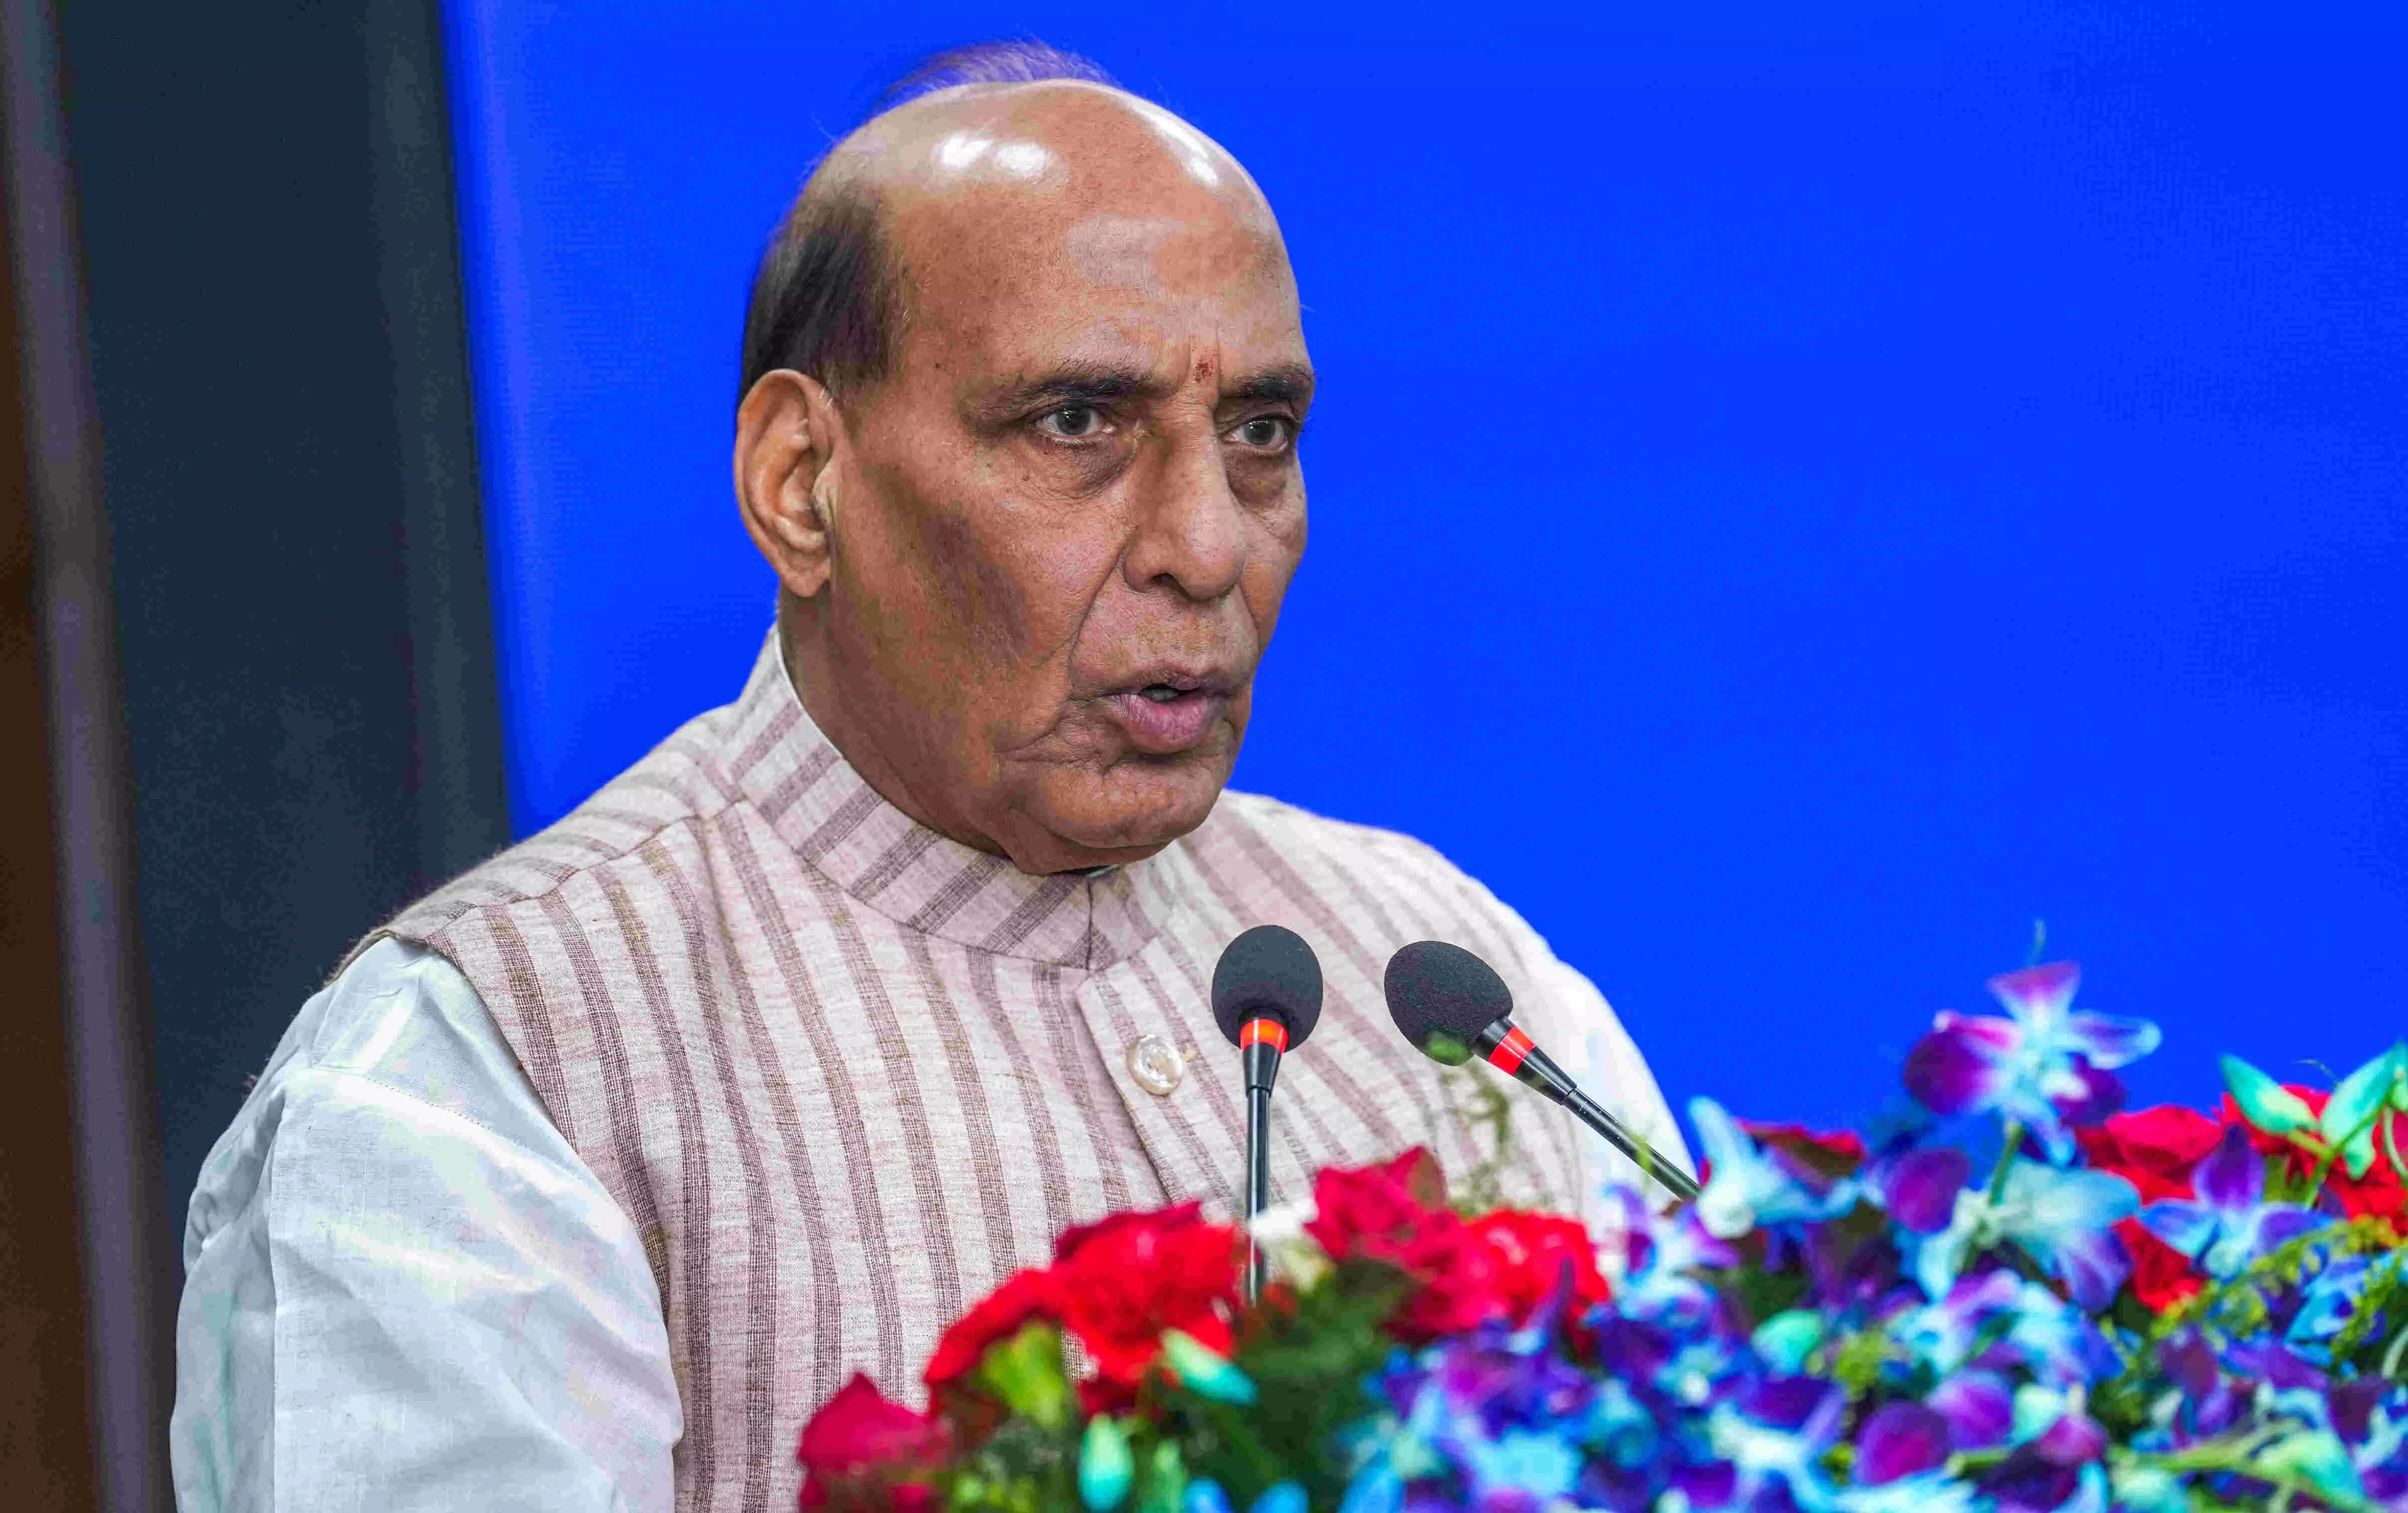 Have full faith army will wipe out terrorism from Jammu Kashmir says Defence Minister Rajnath Singh